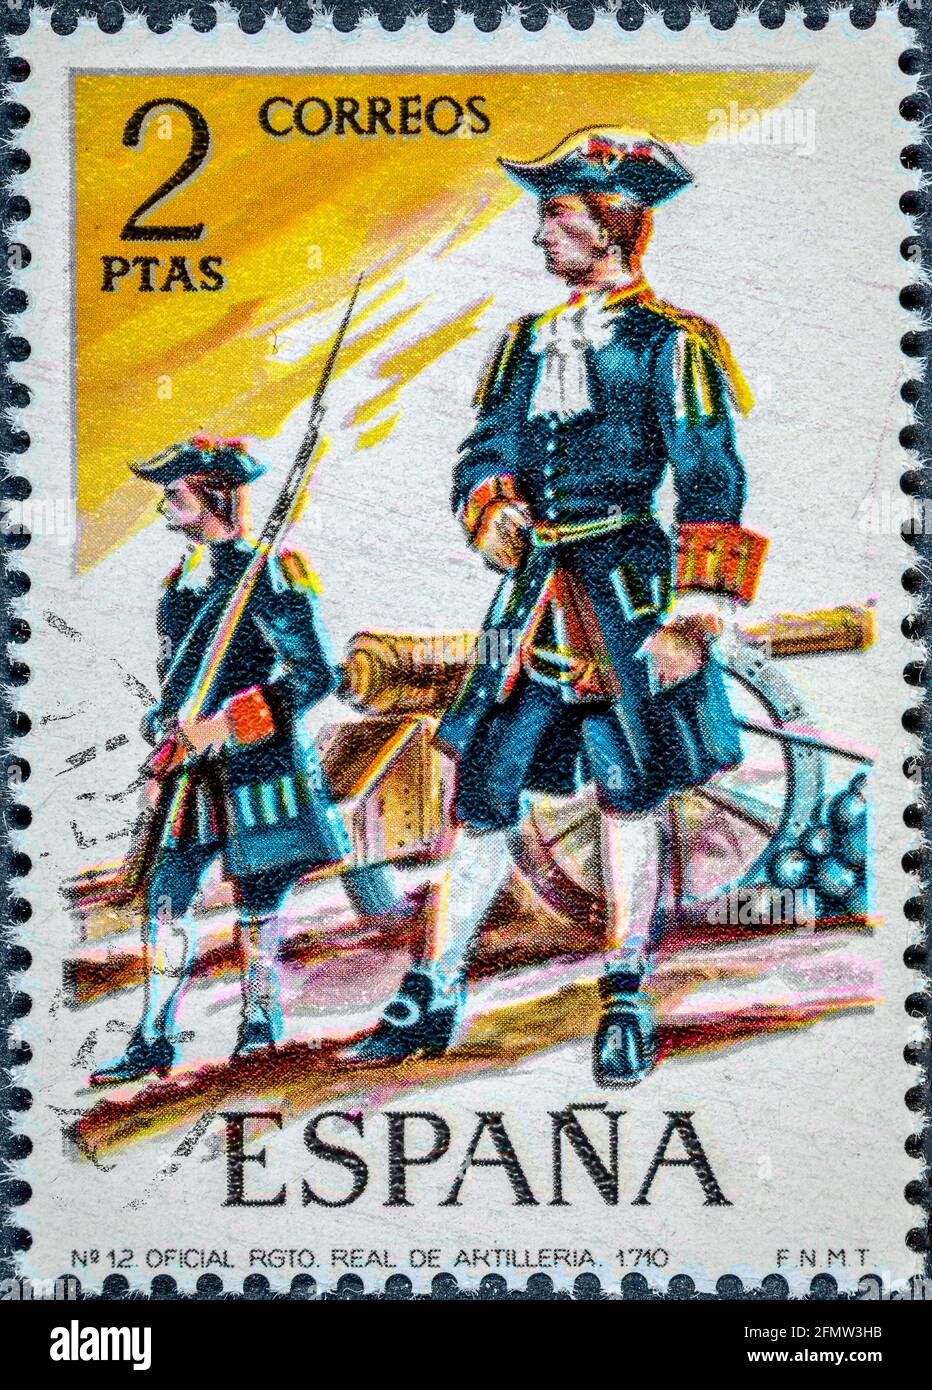 SPAIN - CIRCA 1974: A stamp printed in Spain shows official royal artillery regiment 1710 Stock Photo